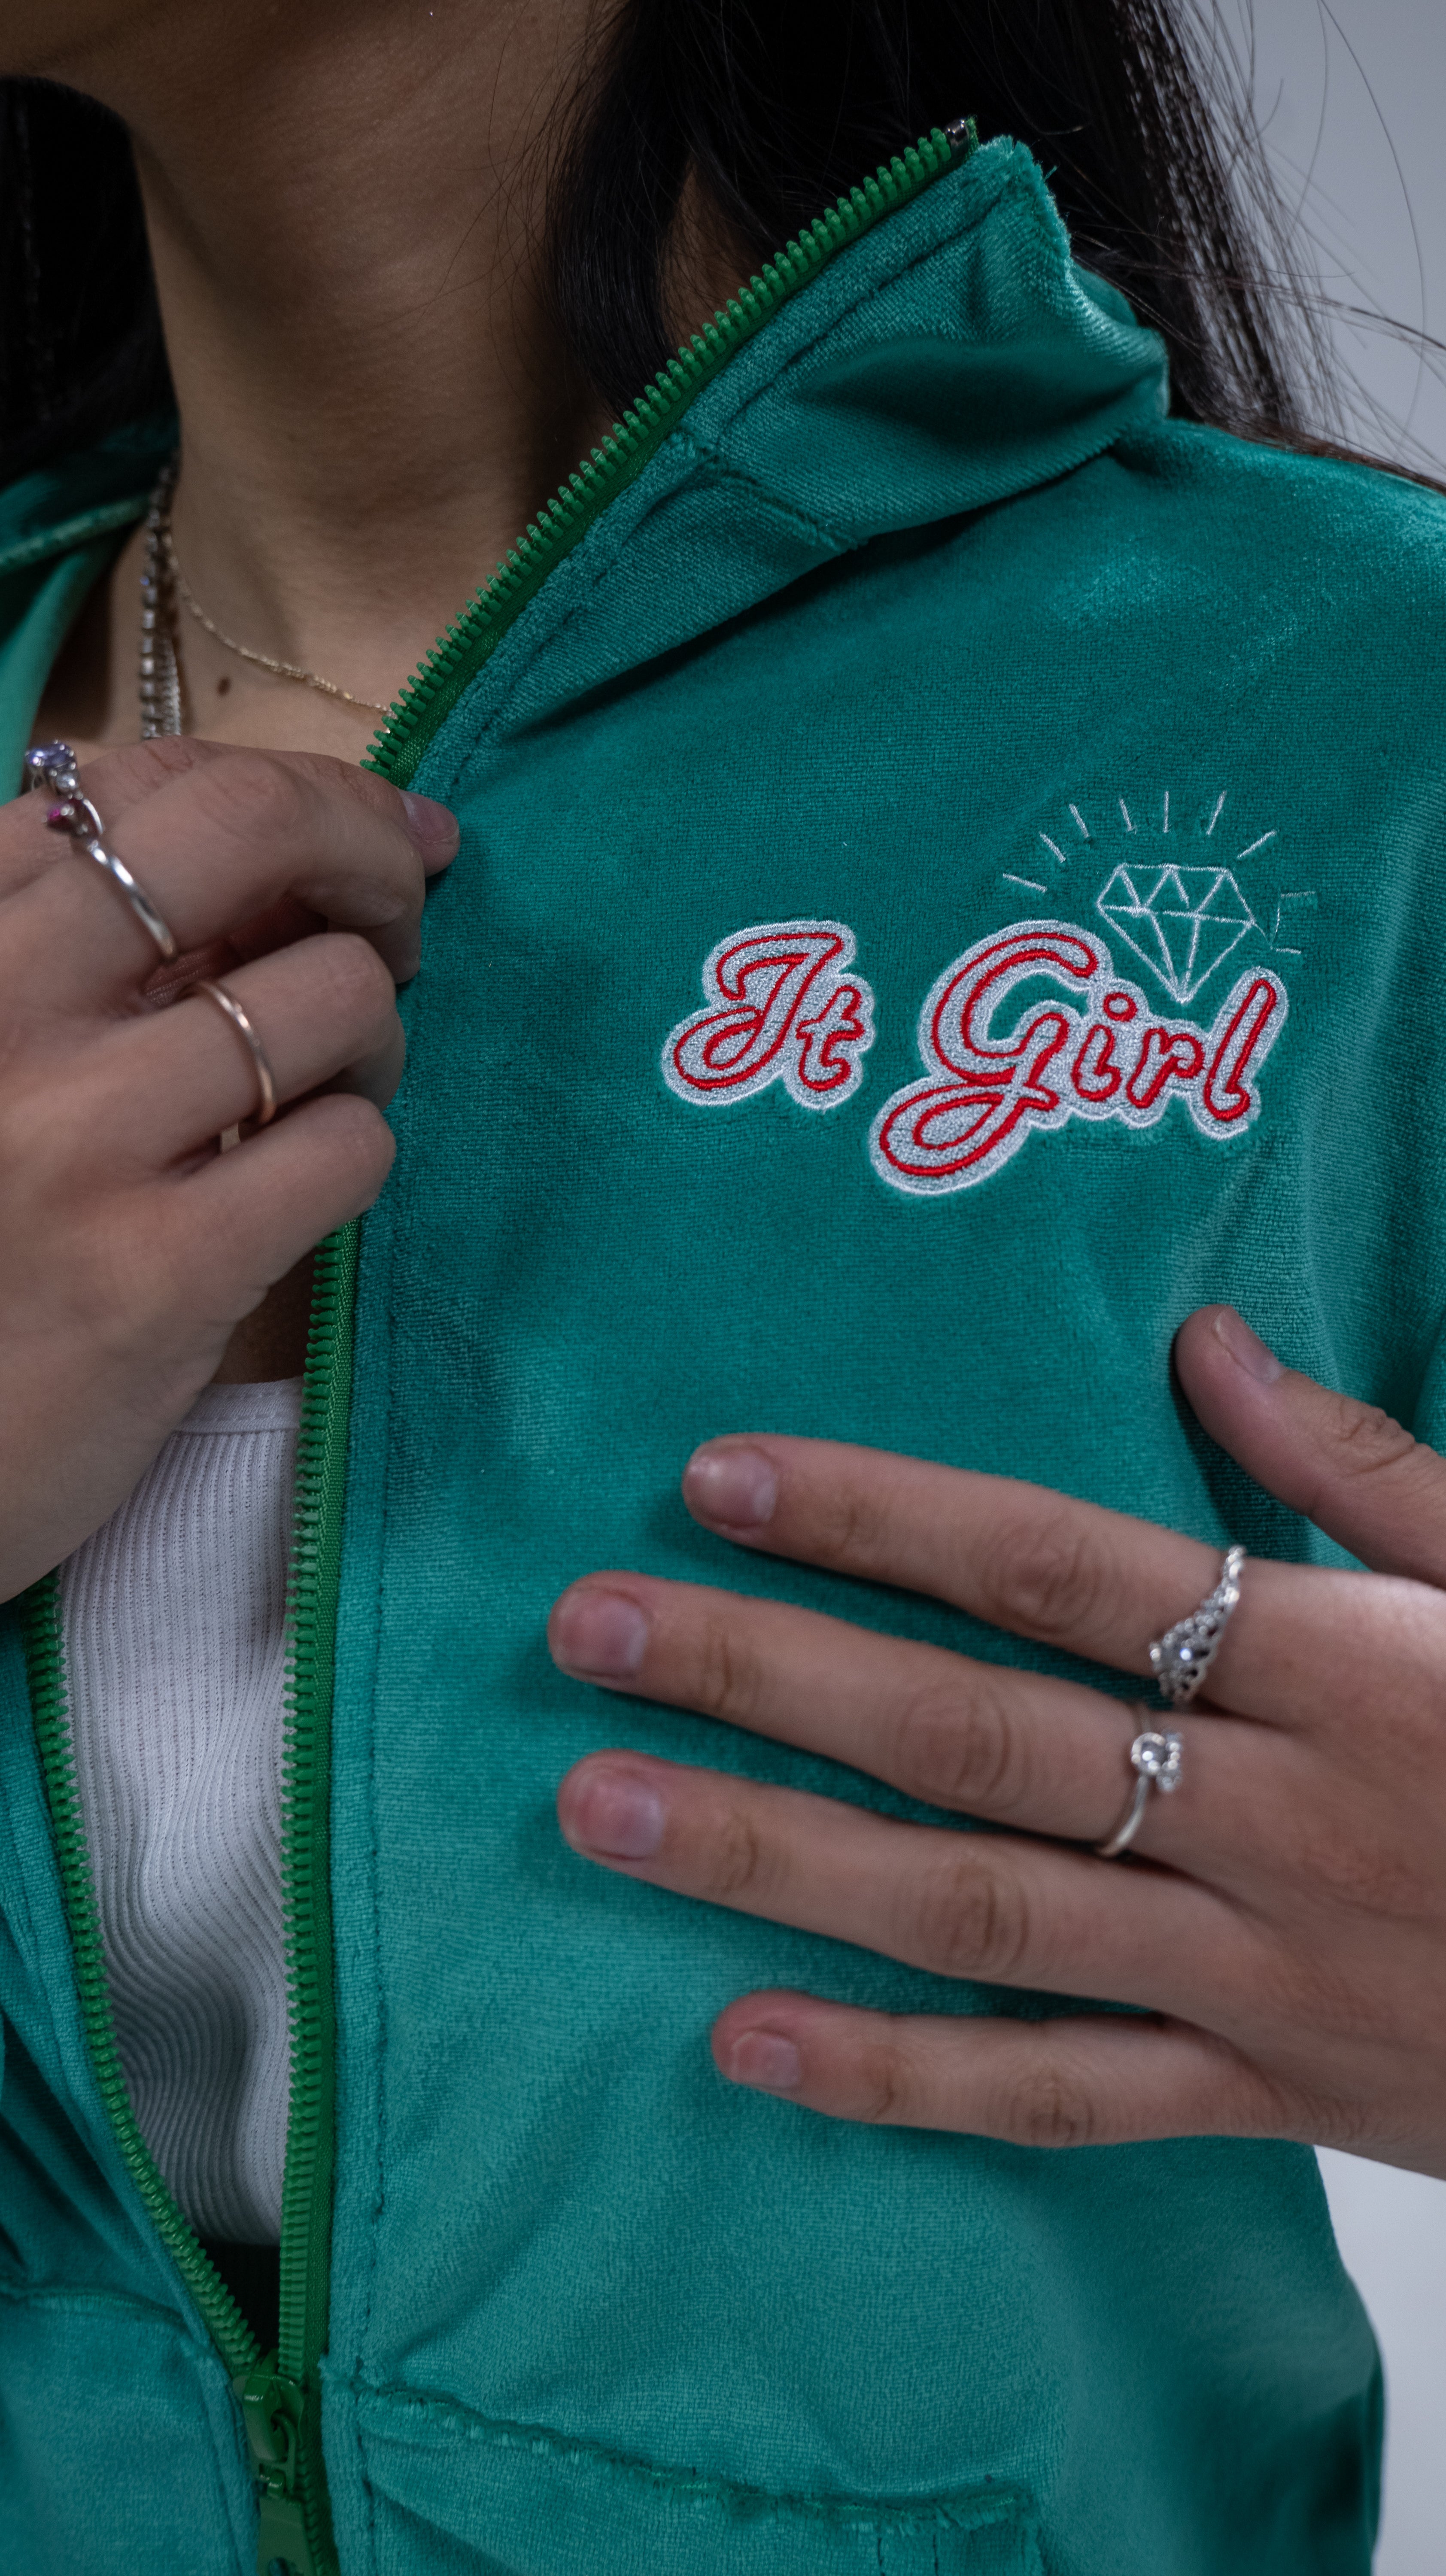 The It Girl Track Suit